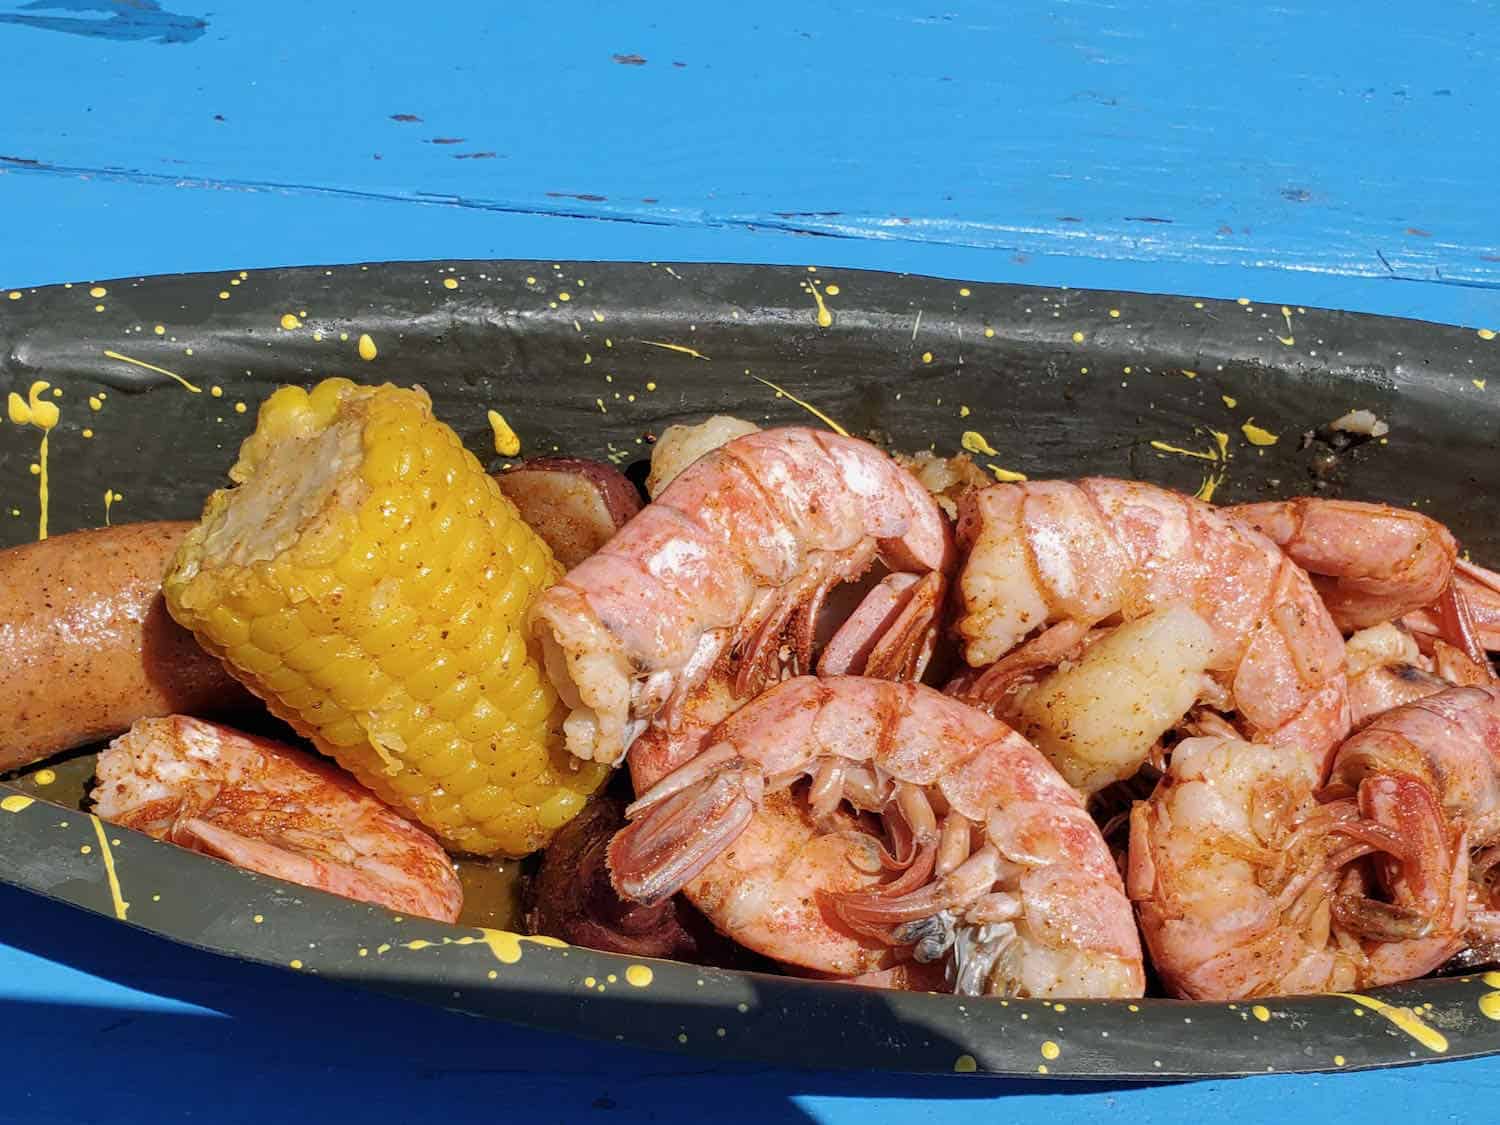 Plate of cooked shrimp and corn on the cob